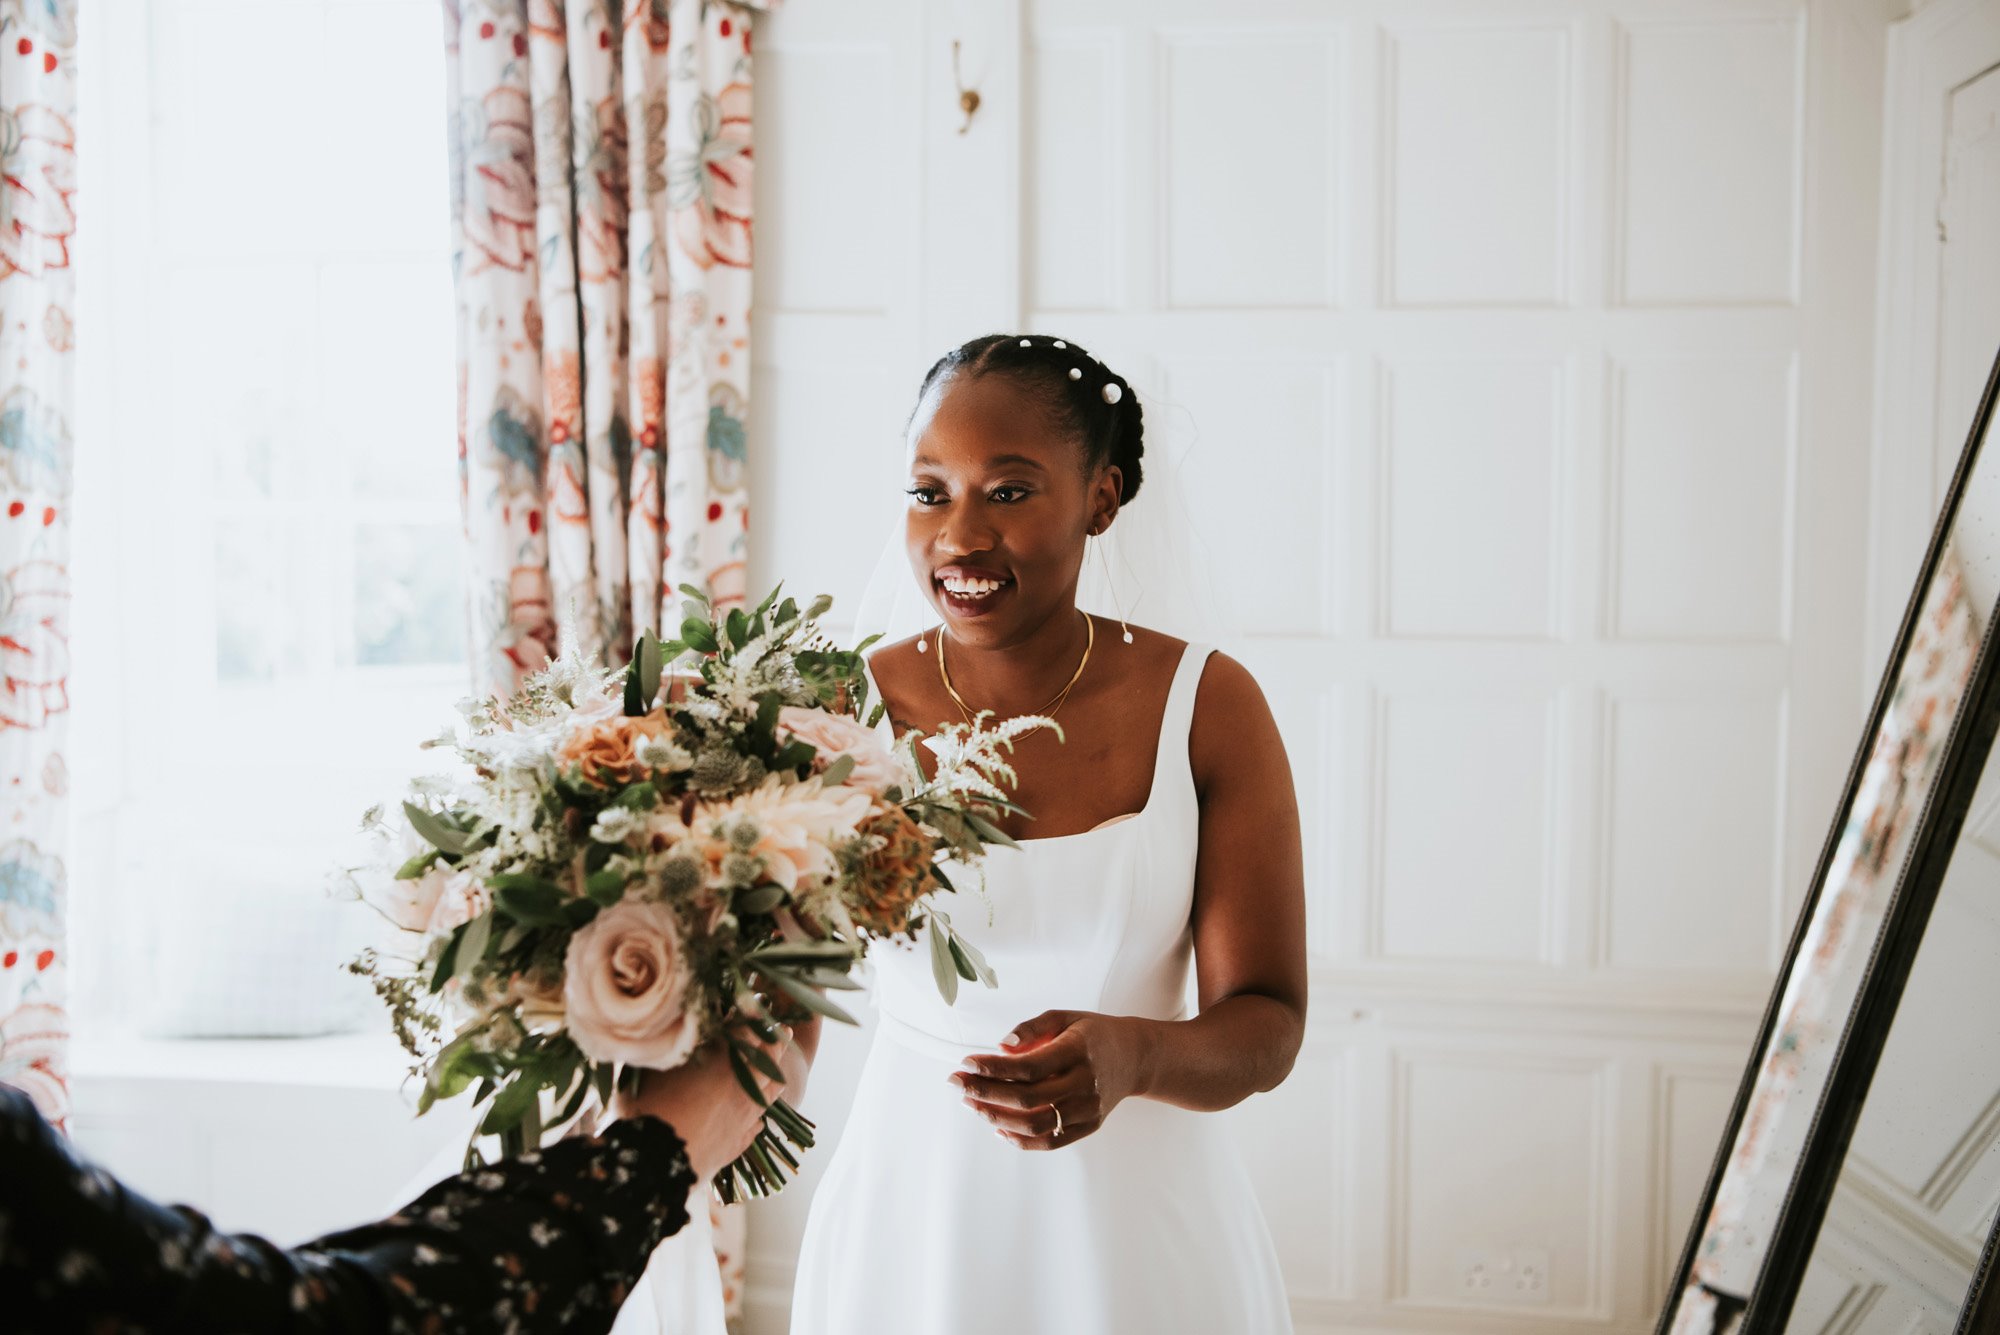 Bride with pearls in her afro hair in elegant updo gets handed her beautiful bouquet in luxurious bedroom of manor house venue